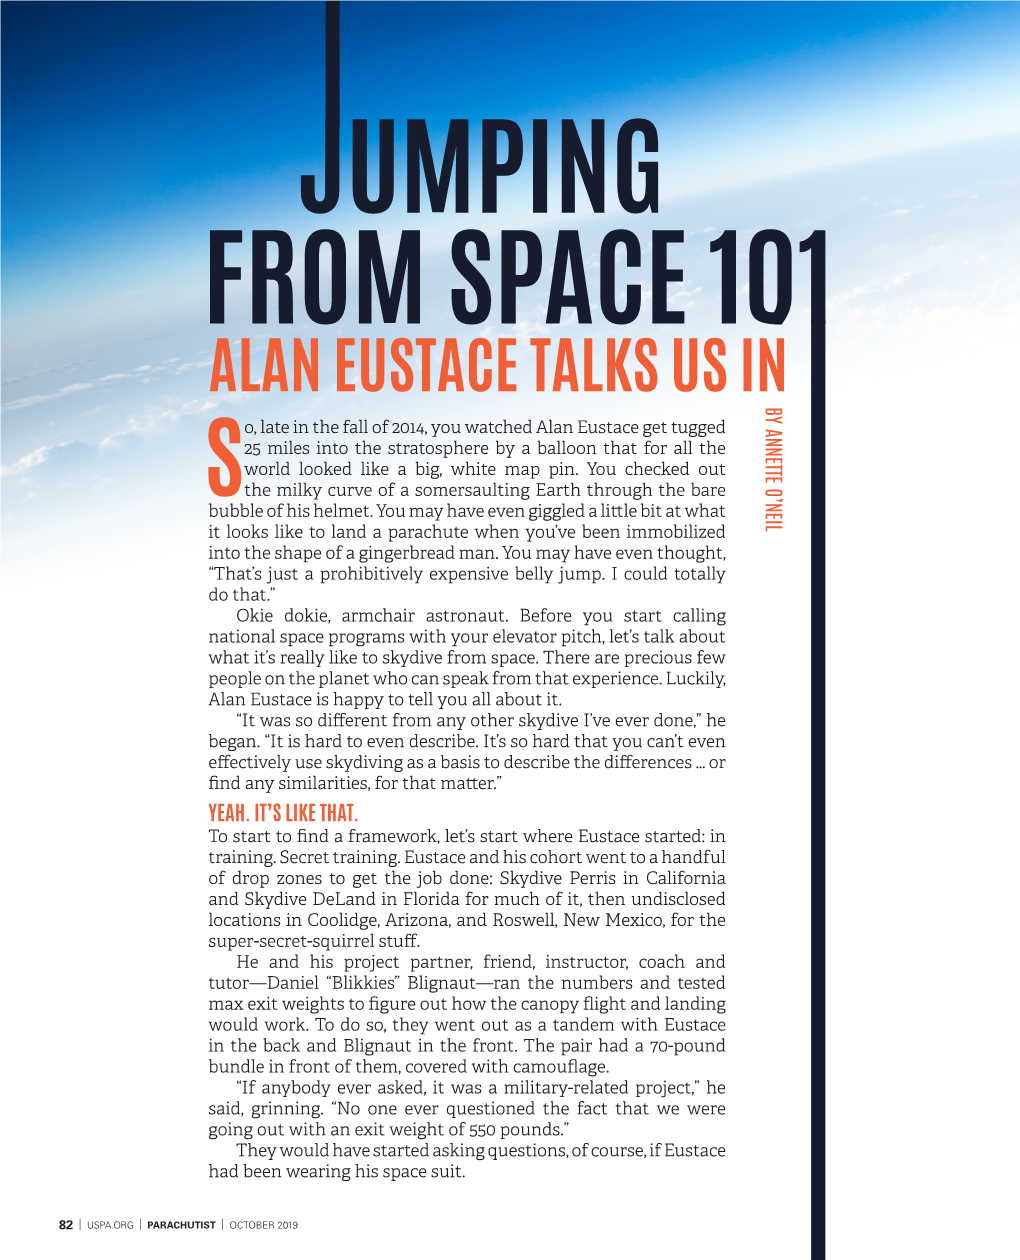 Jumping from Space 101